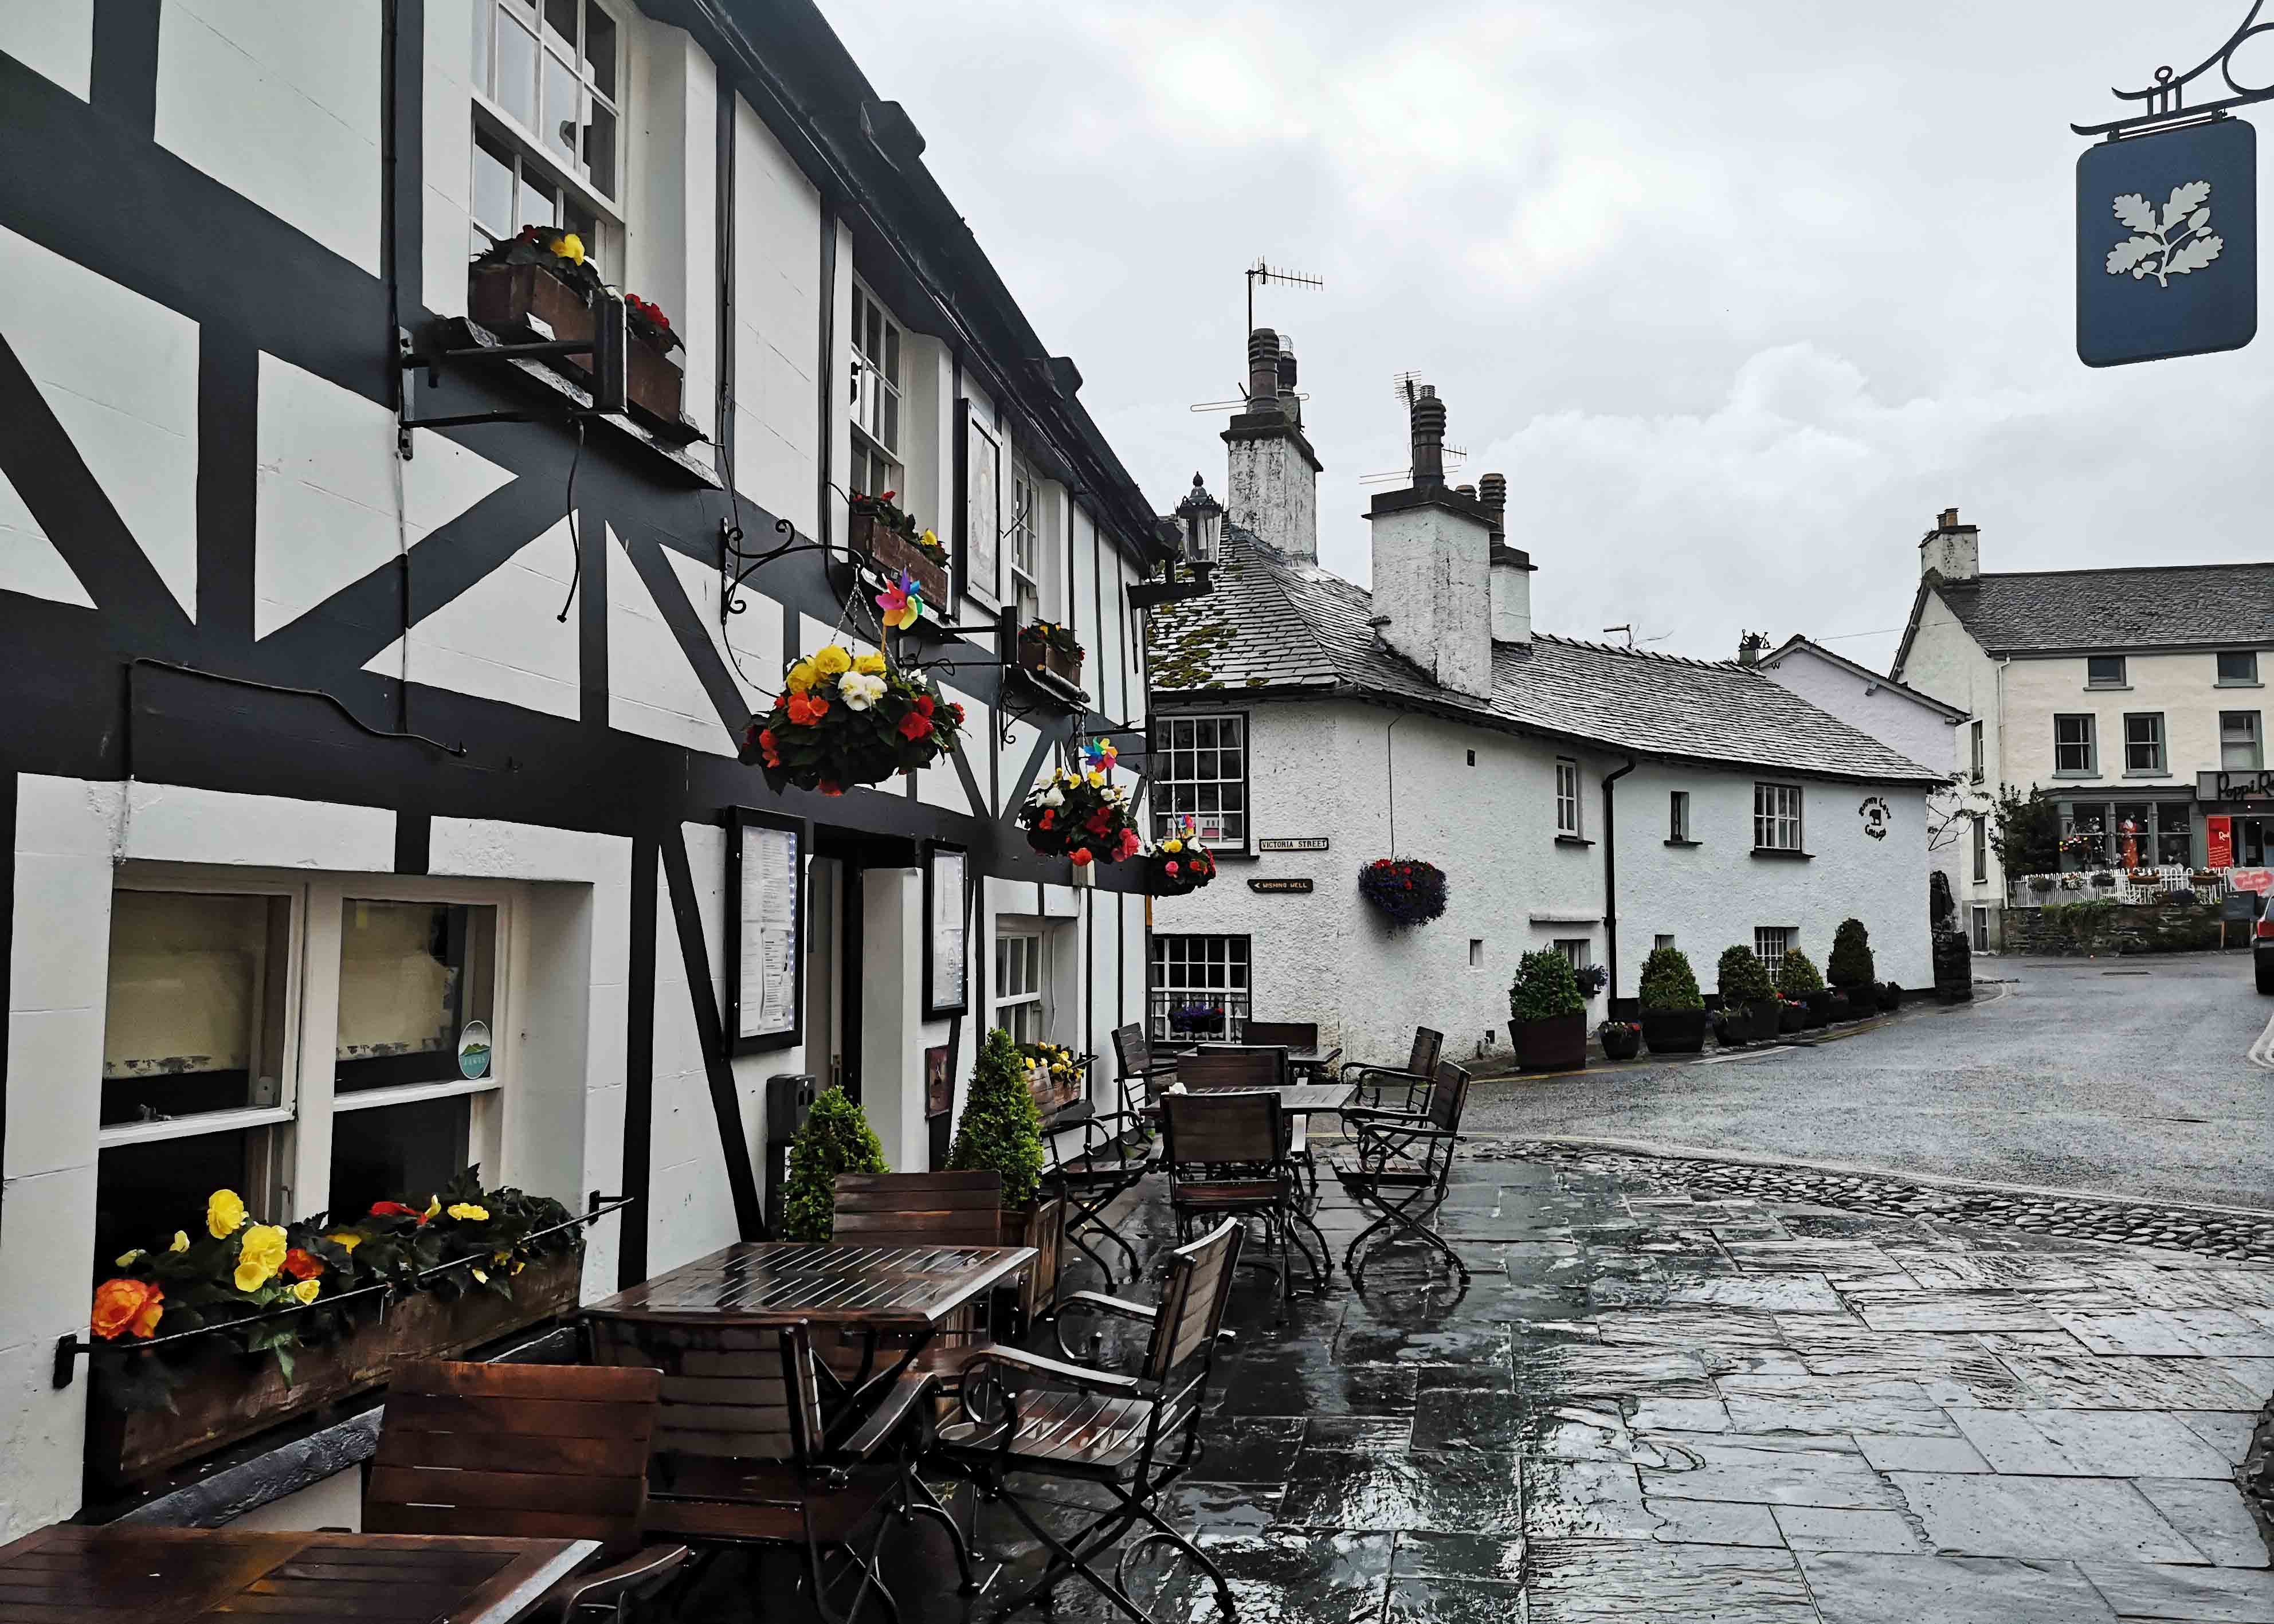 Lake District traditional village with flowers and cobbled streets